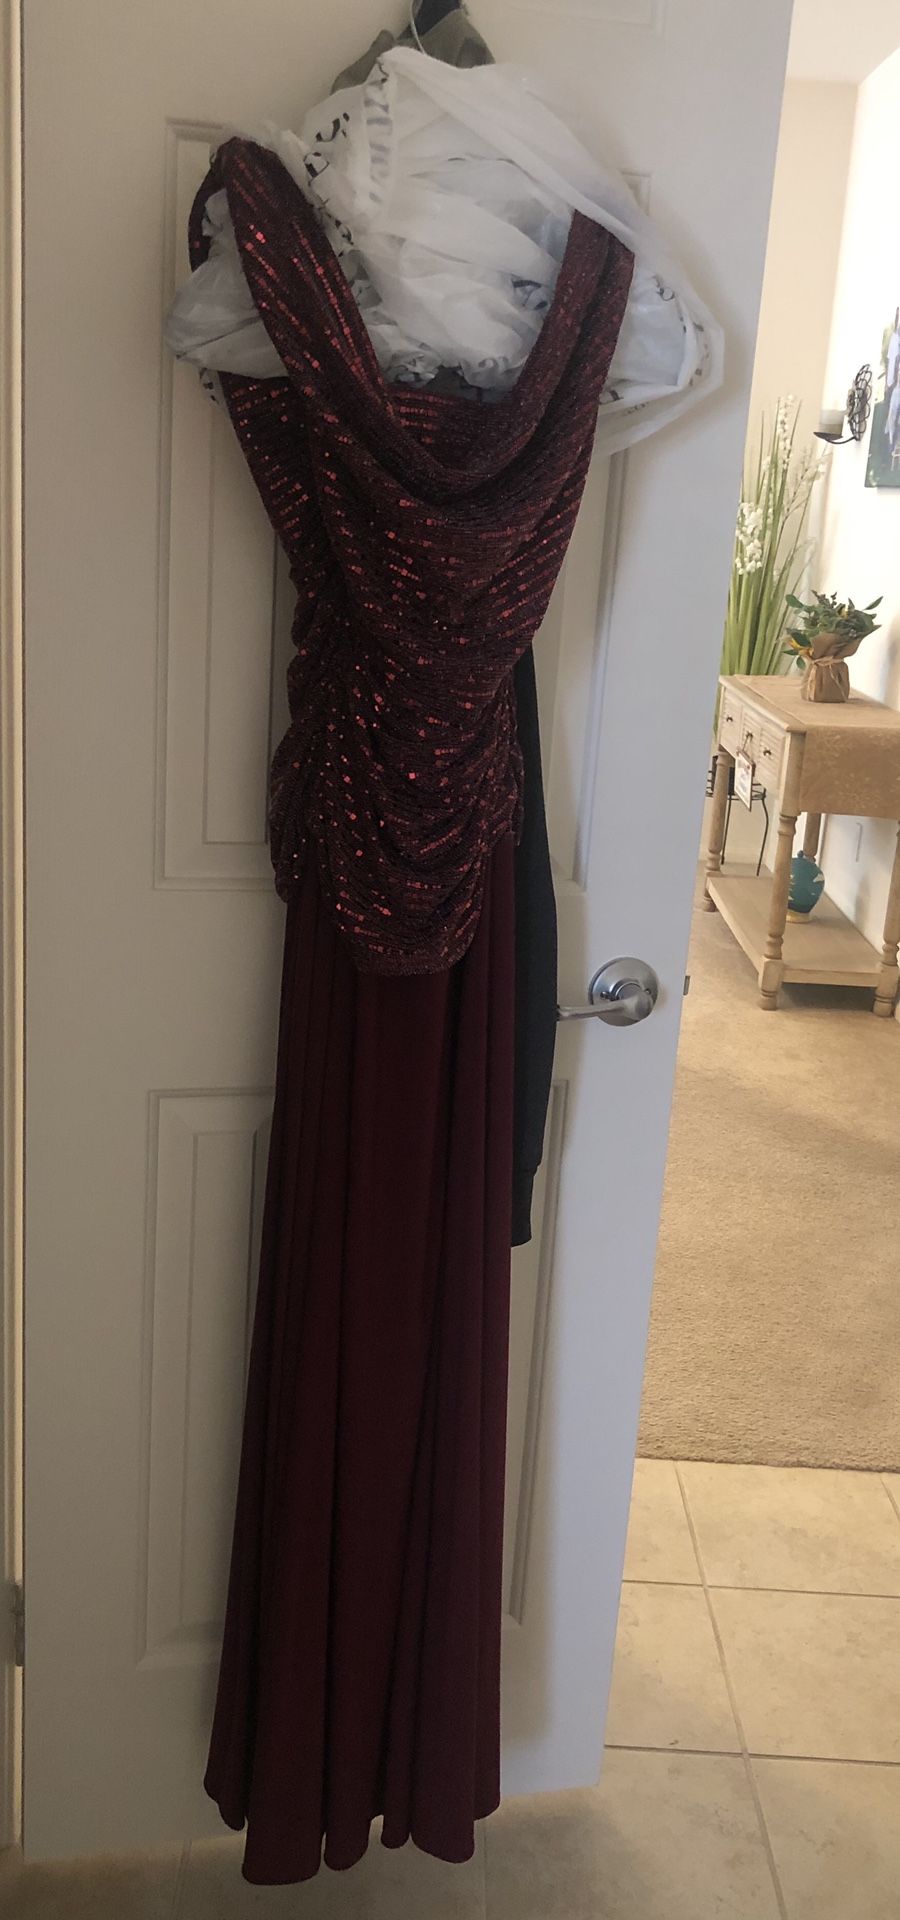 Evening Gown or Prom Dress